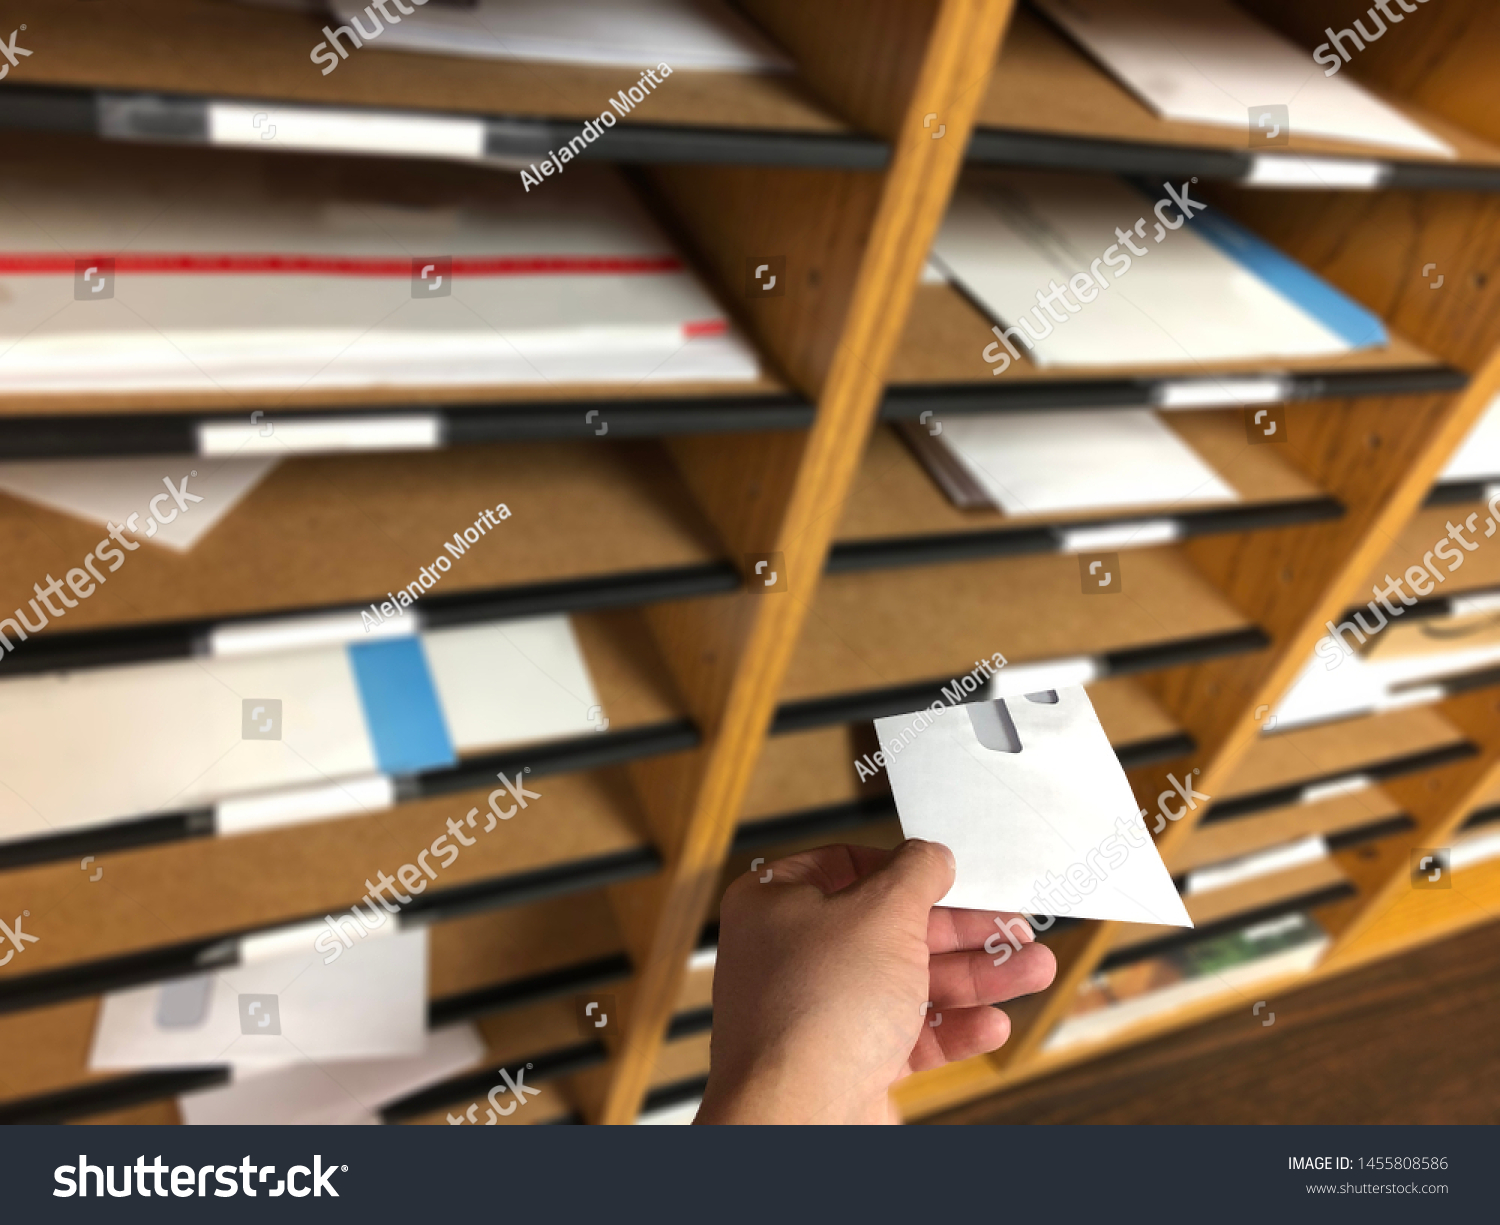 Man´s Hand Delivering & Receiving Mail from a Mailbox Sorter inside the Office. #1455808586